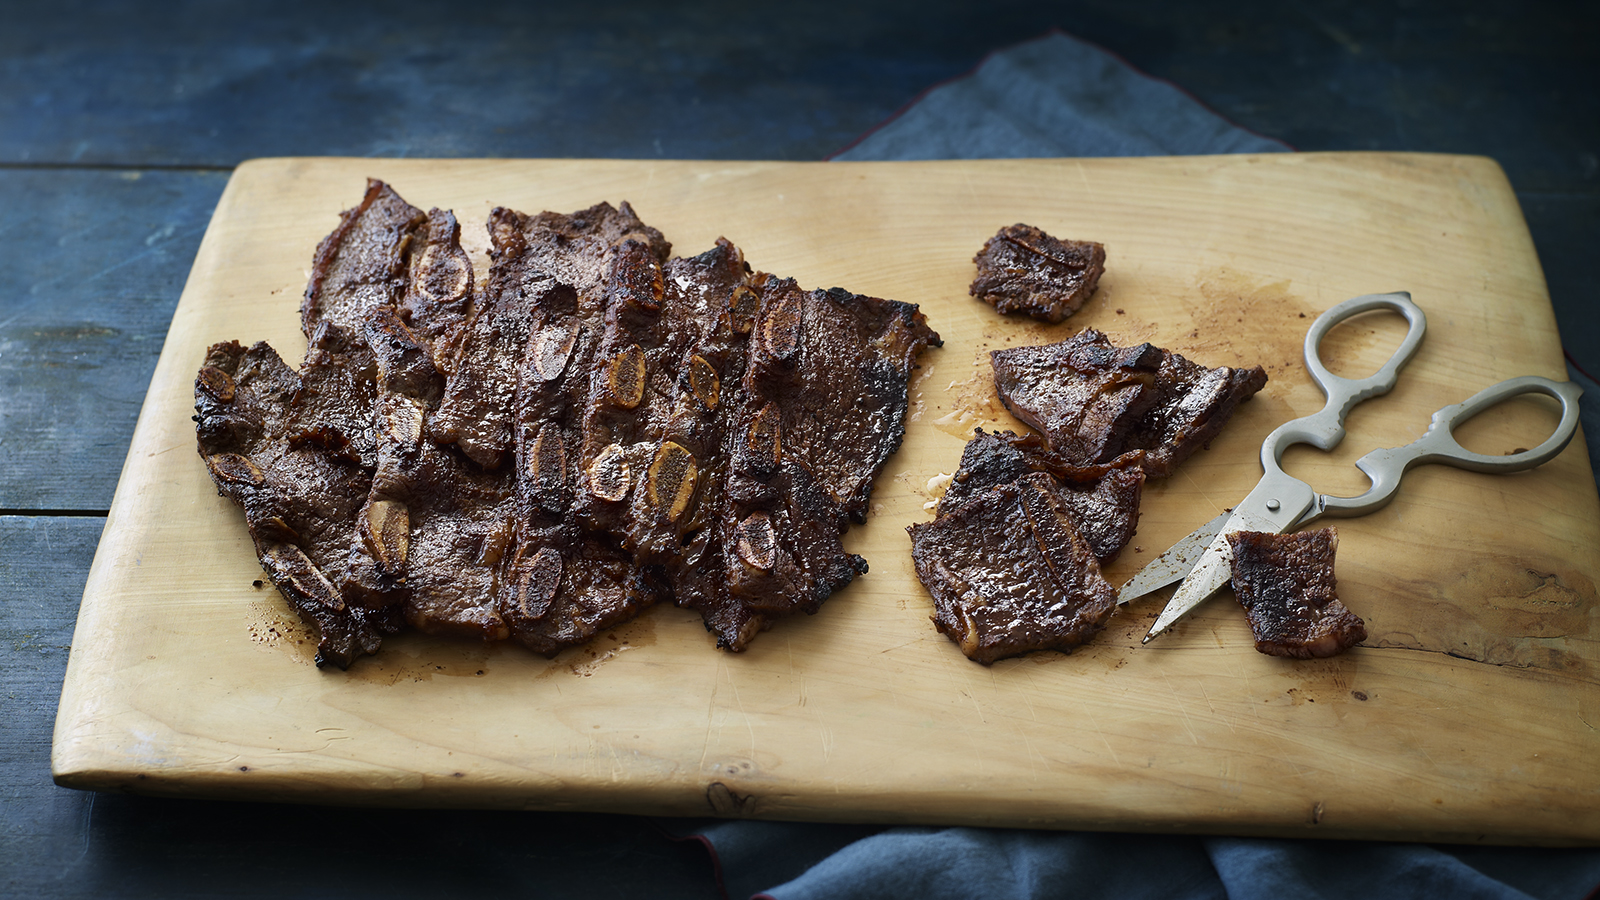 https://food-images.files.bbci.co.uk/food/recipes/korean_grilled_beef_72703_16x9.jpg